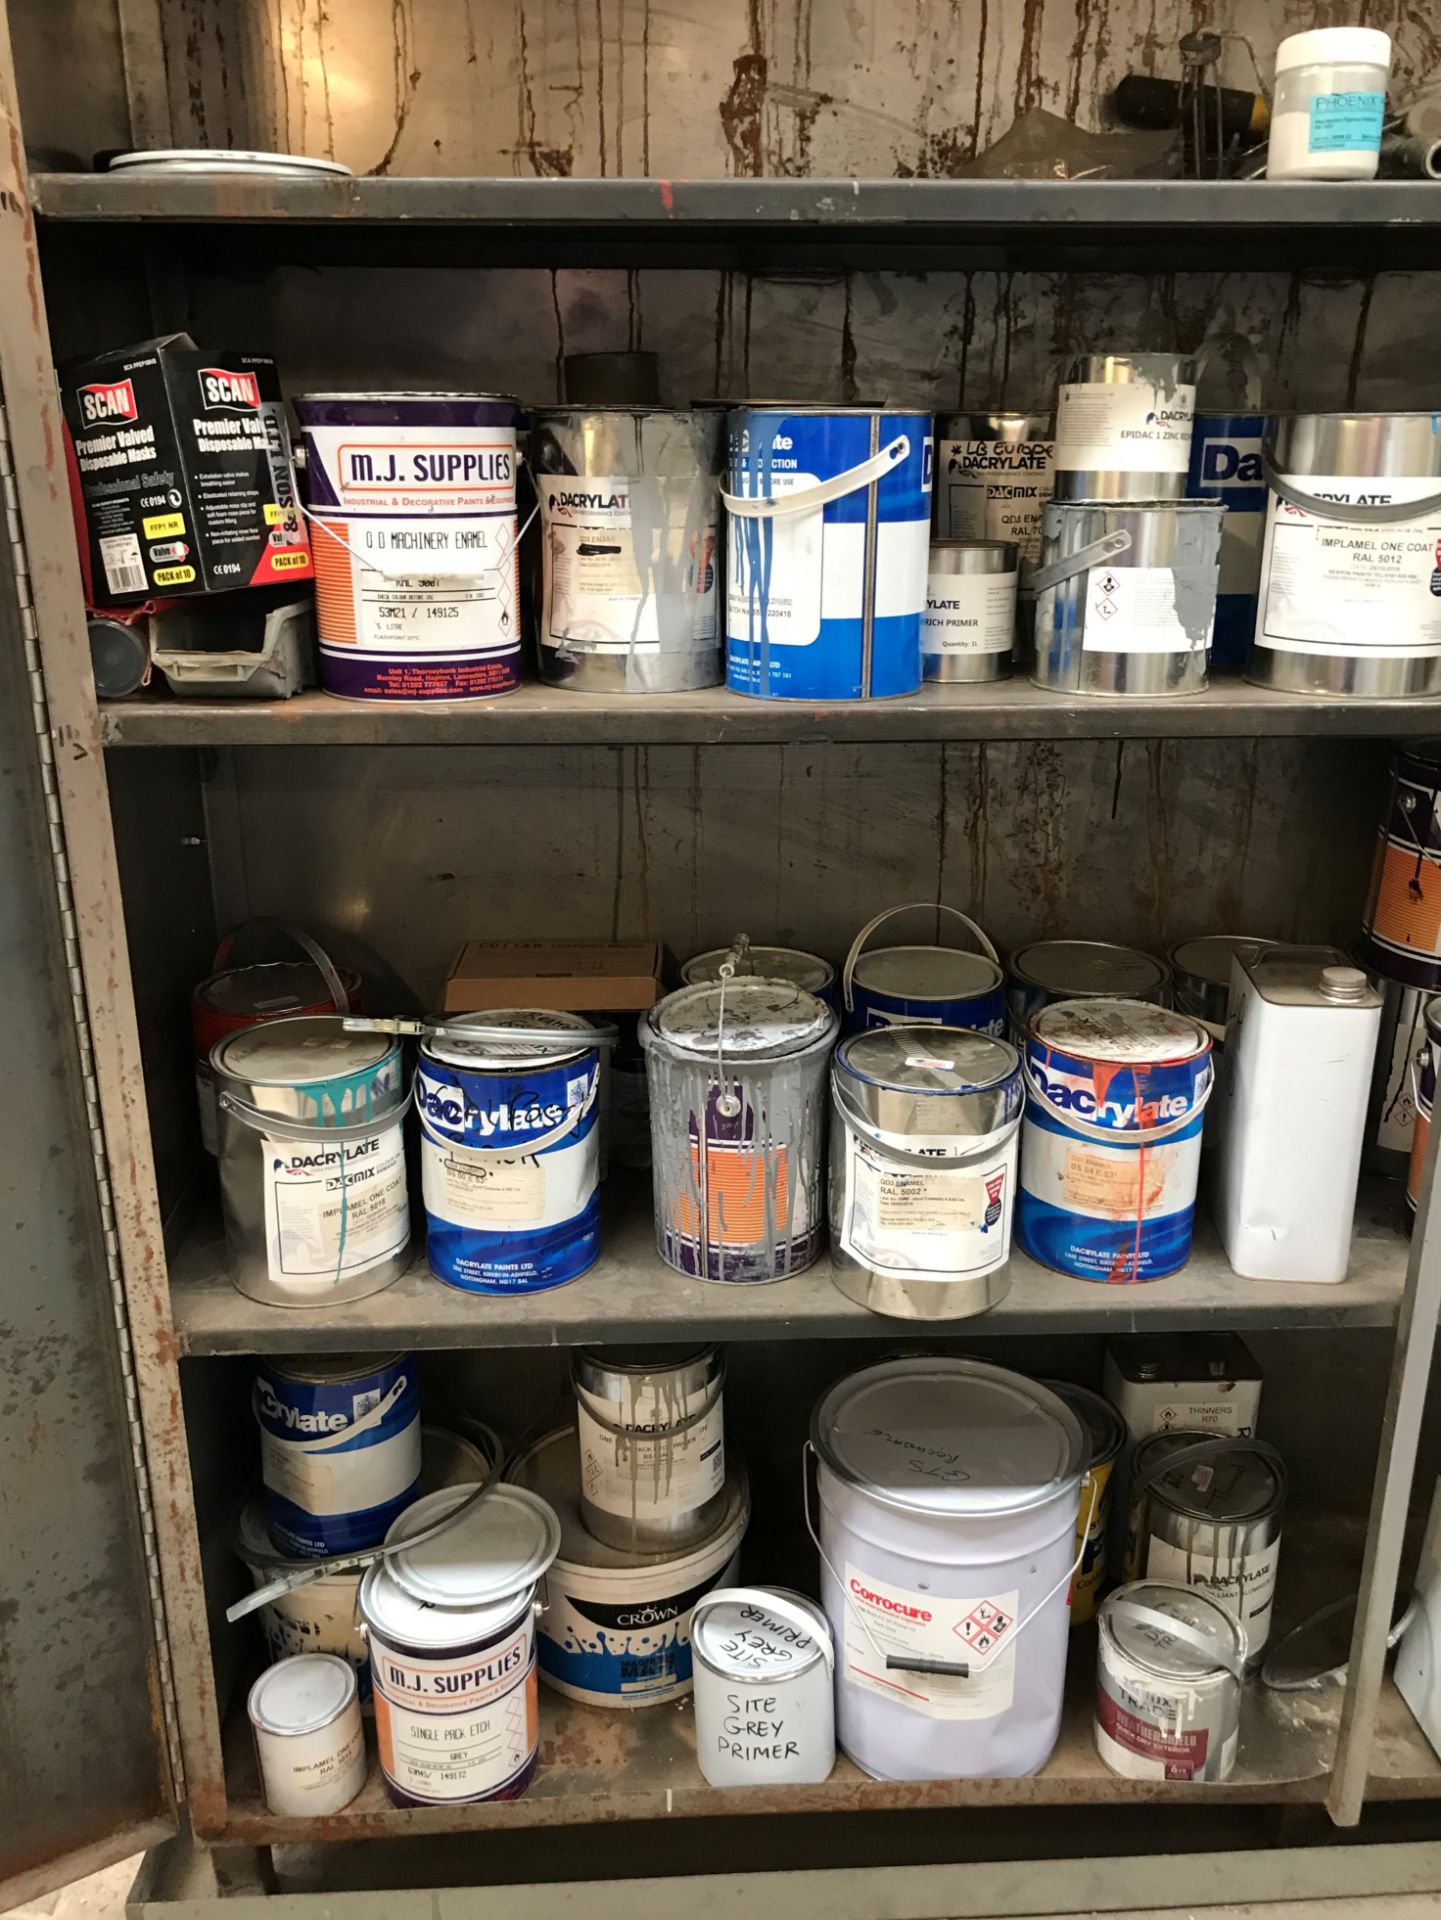 A Quantity of Paints, Primers and Thinners with Heavy Duty Welded Steel Inflammables Cabinet, 96in w - Image 3 of 4